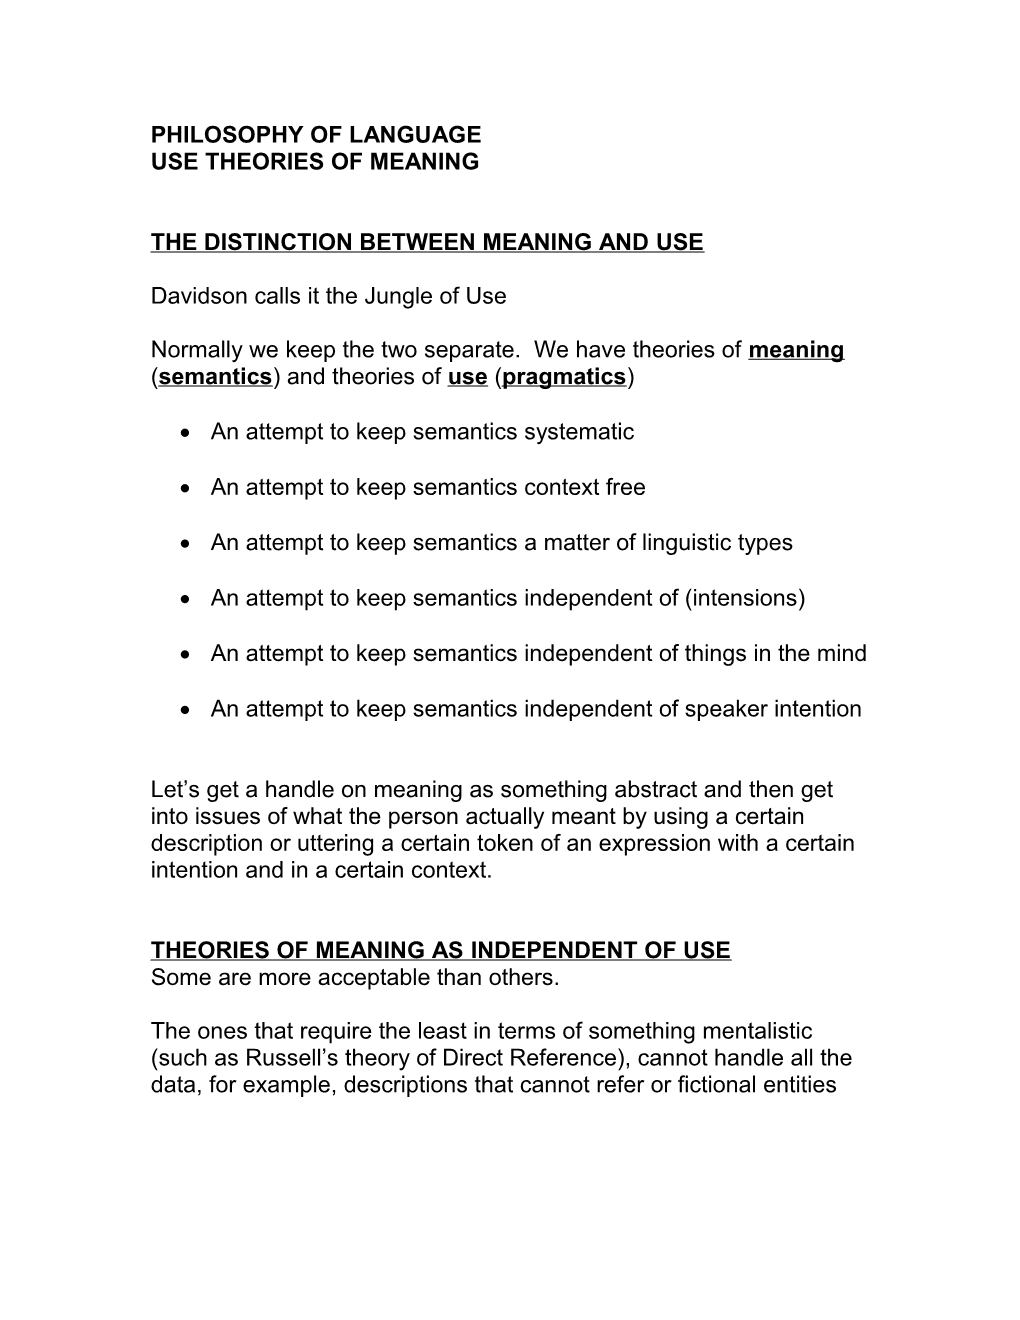 History of the Distinction Between Meaning Vs